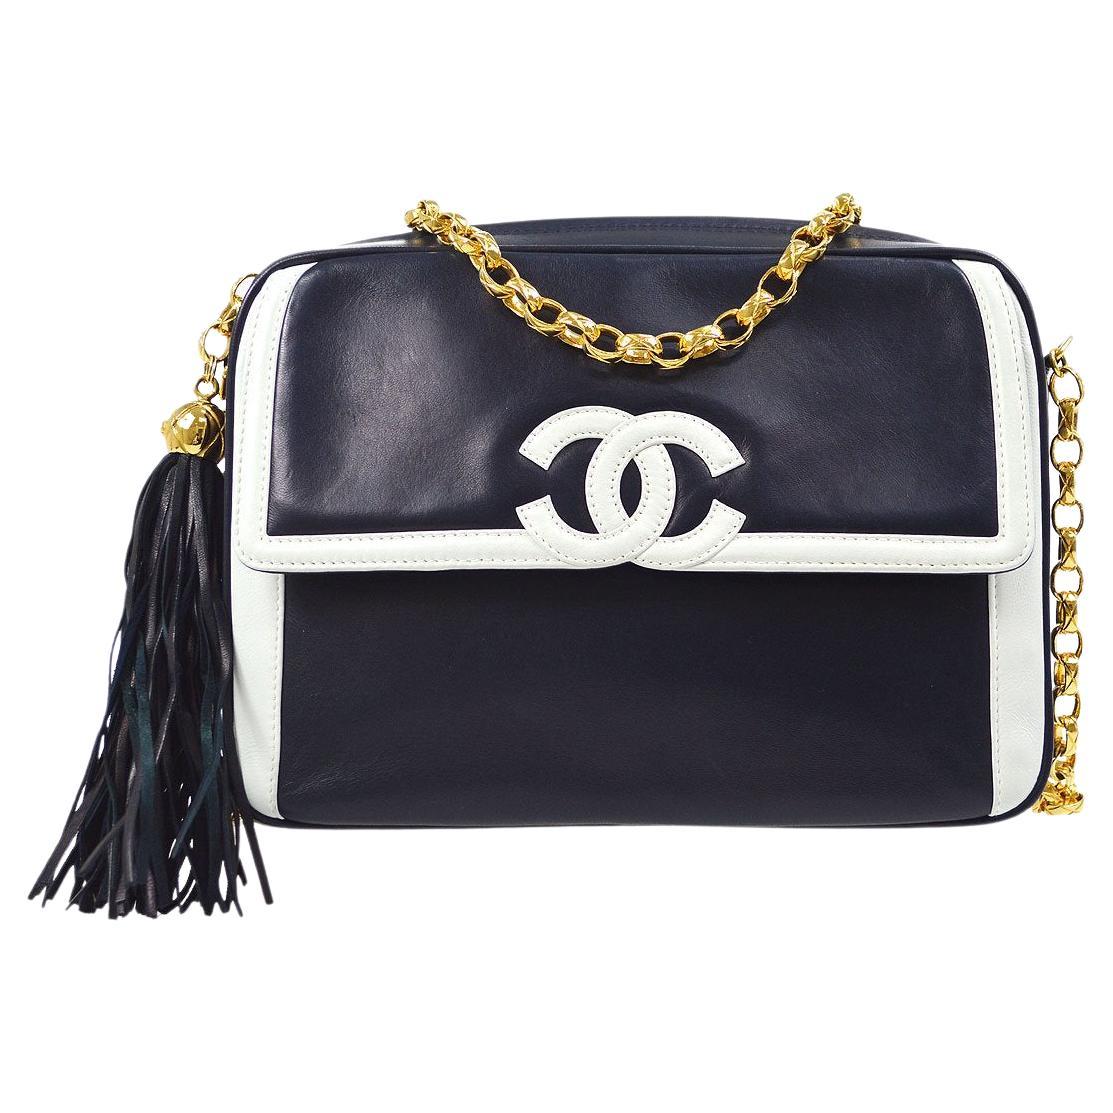 CHANEL Navy Blue White Trim Leather Gold Small Evening Camera Shoulder Bag